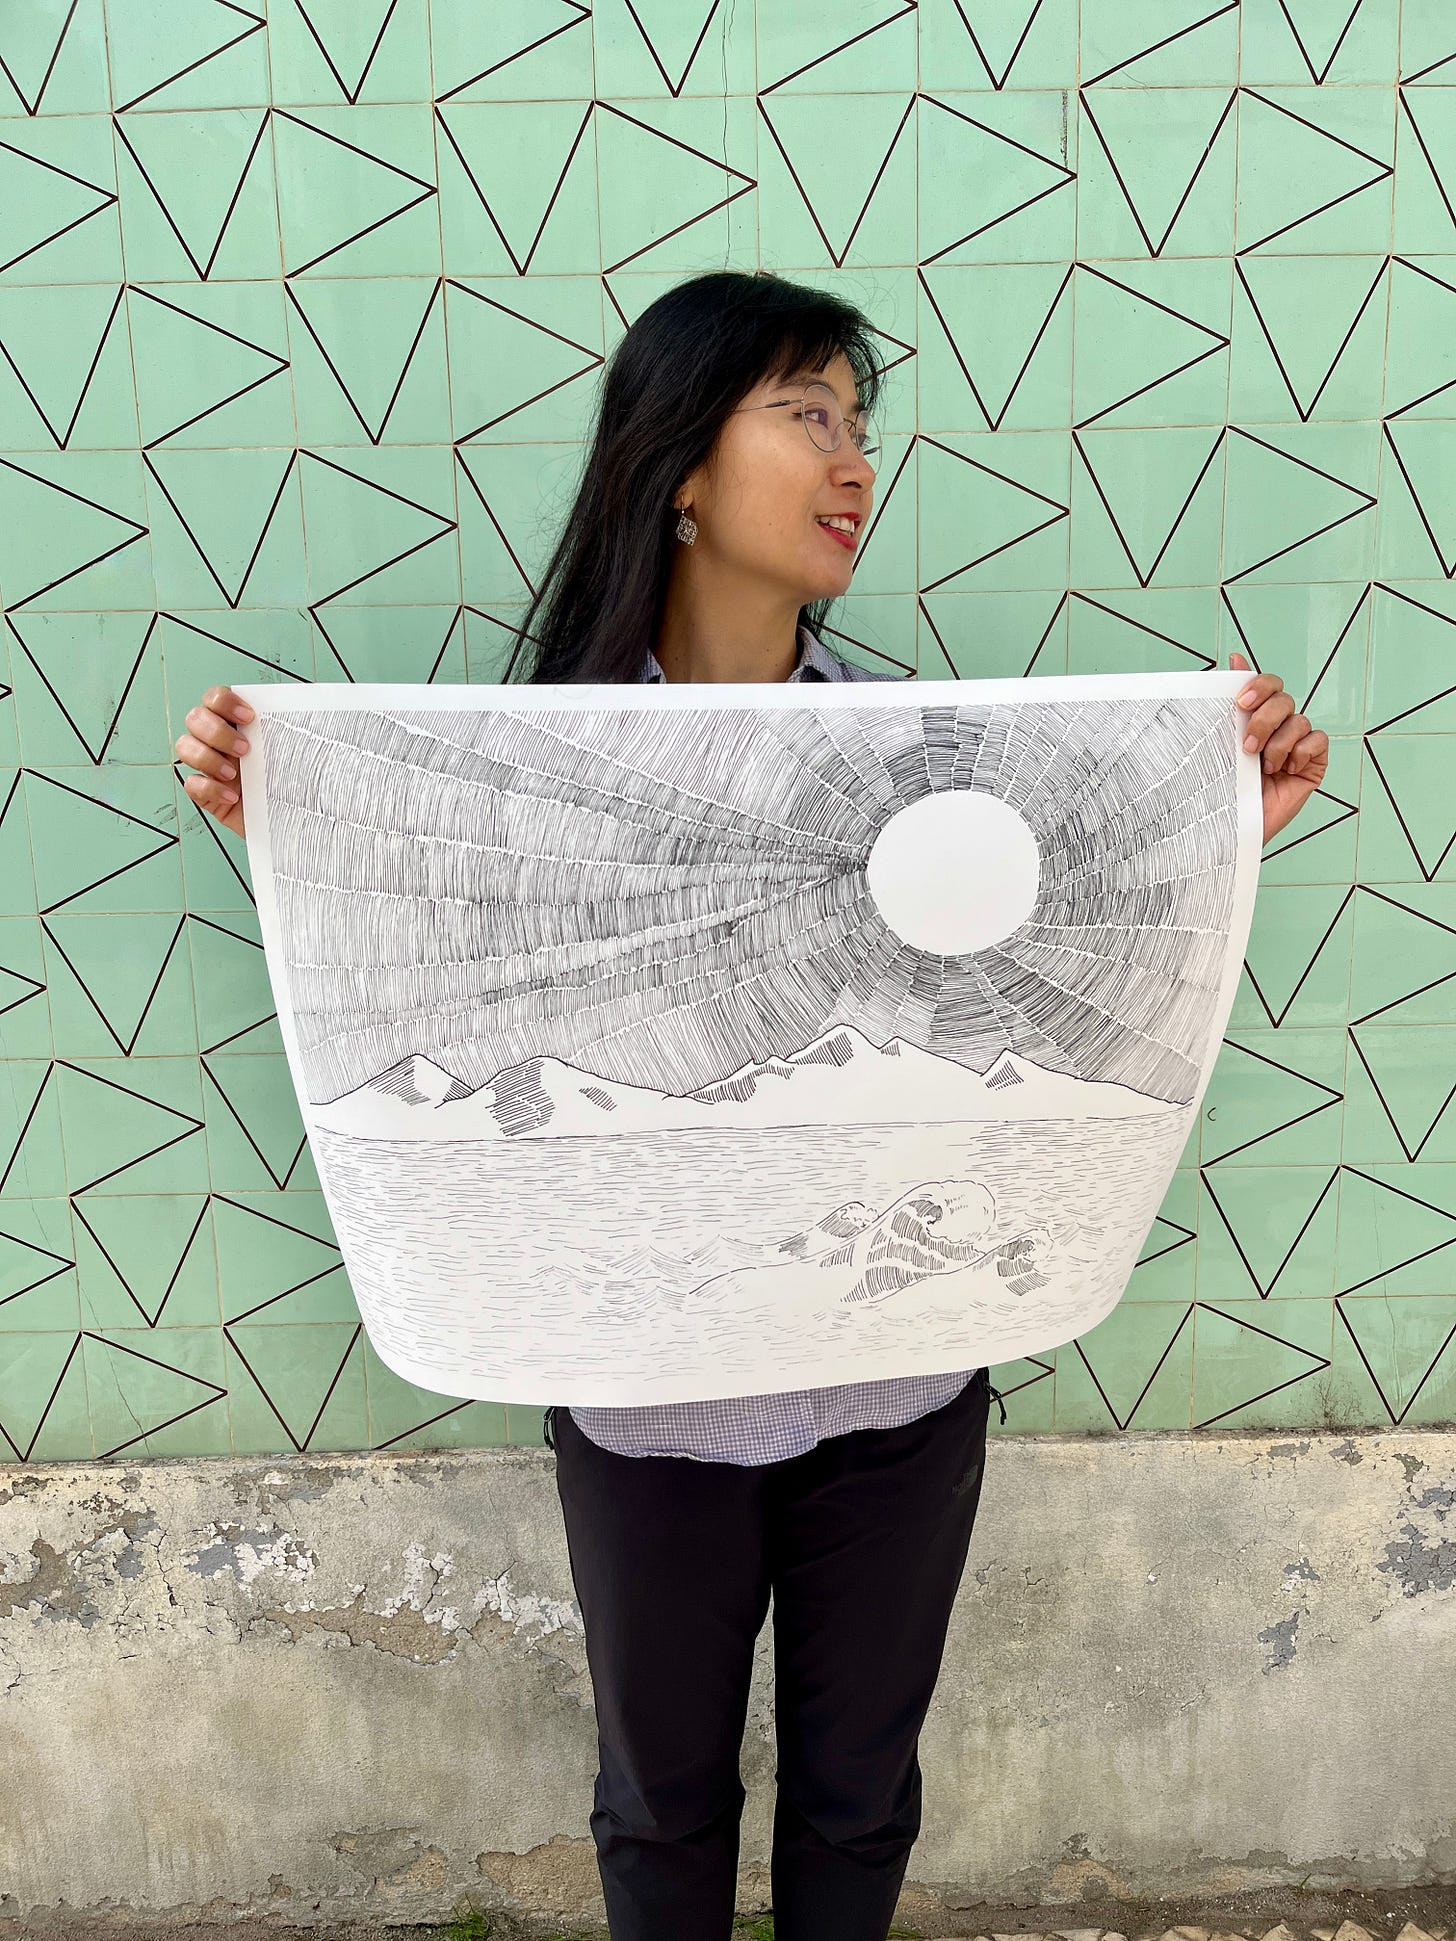 image: photo of an artist holding up her line drawing artwork, In Its Place